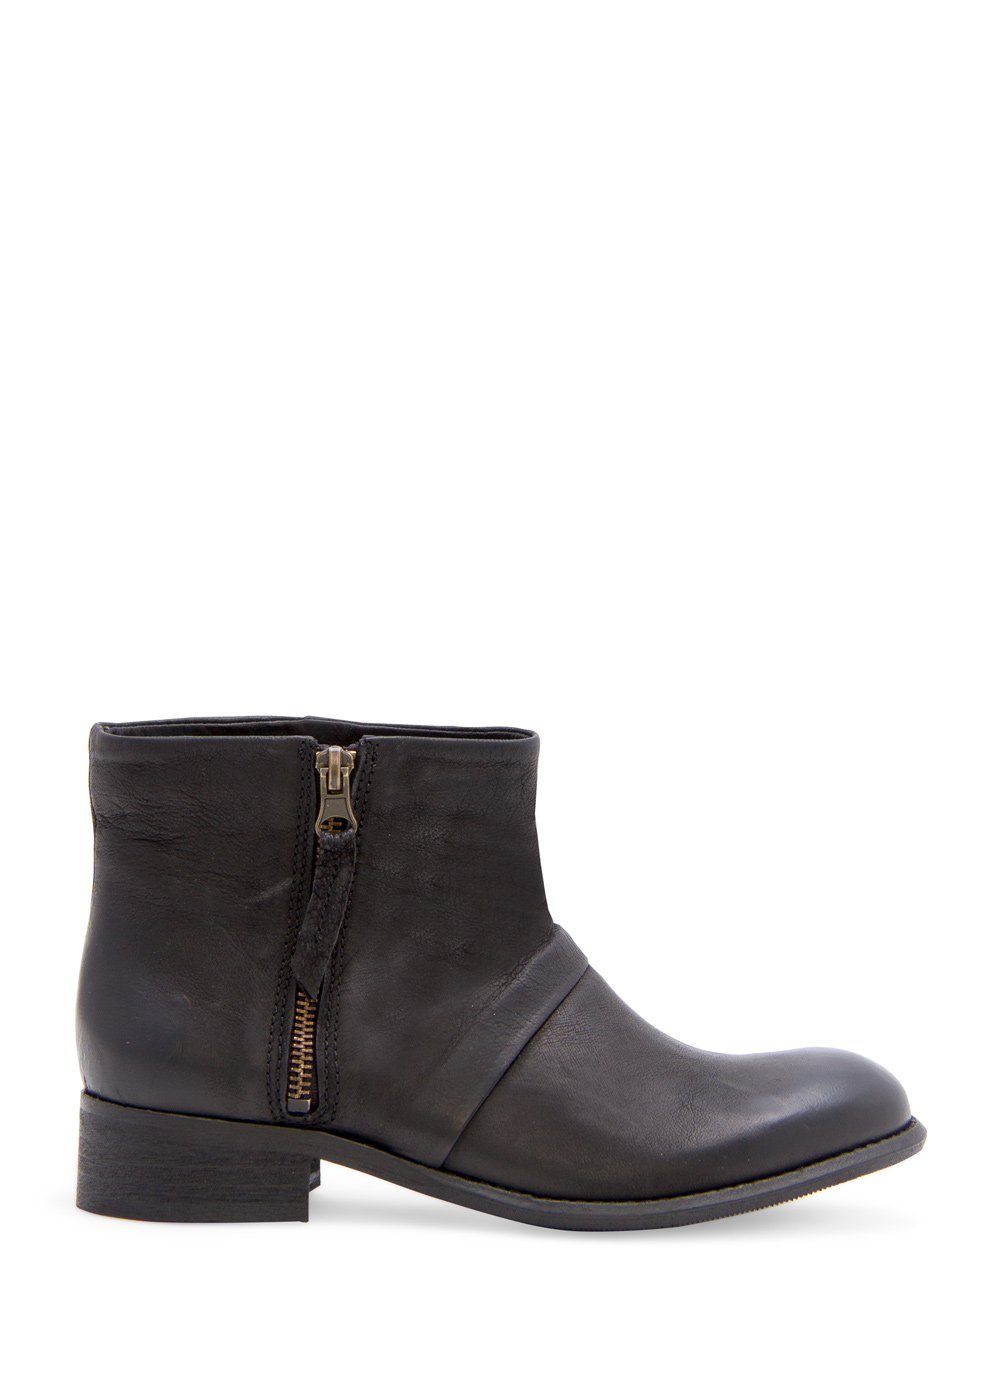 Lyst - Mango Leather Biker Ankle Boots in Black